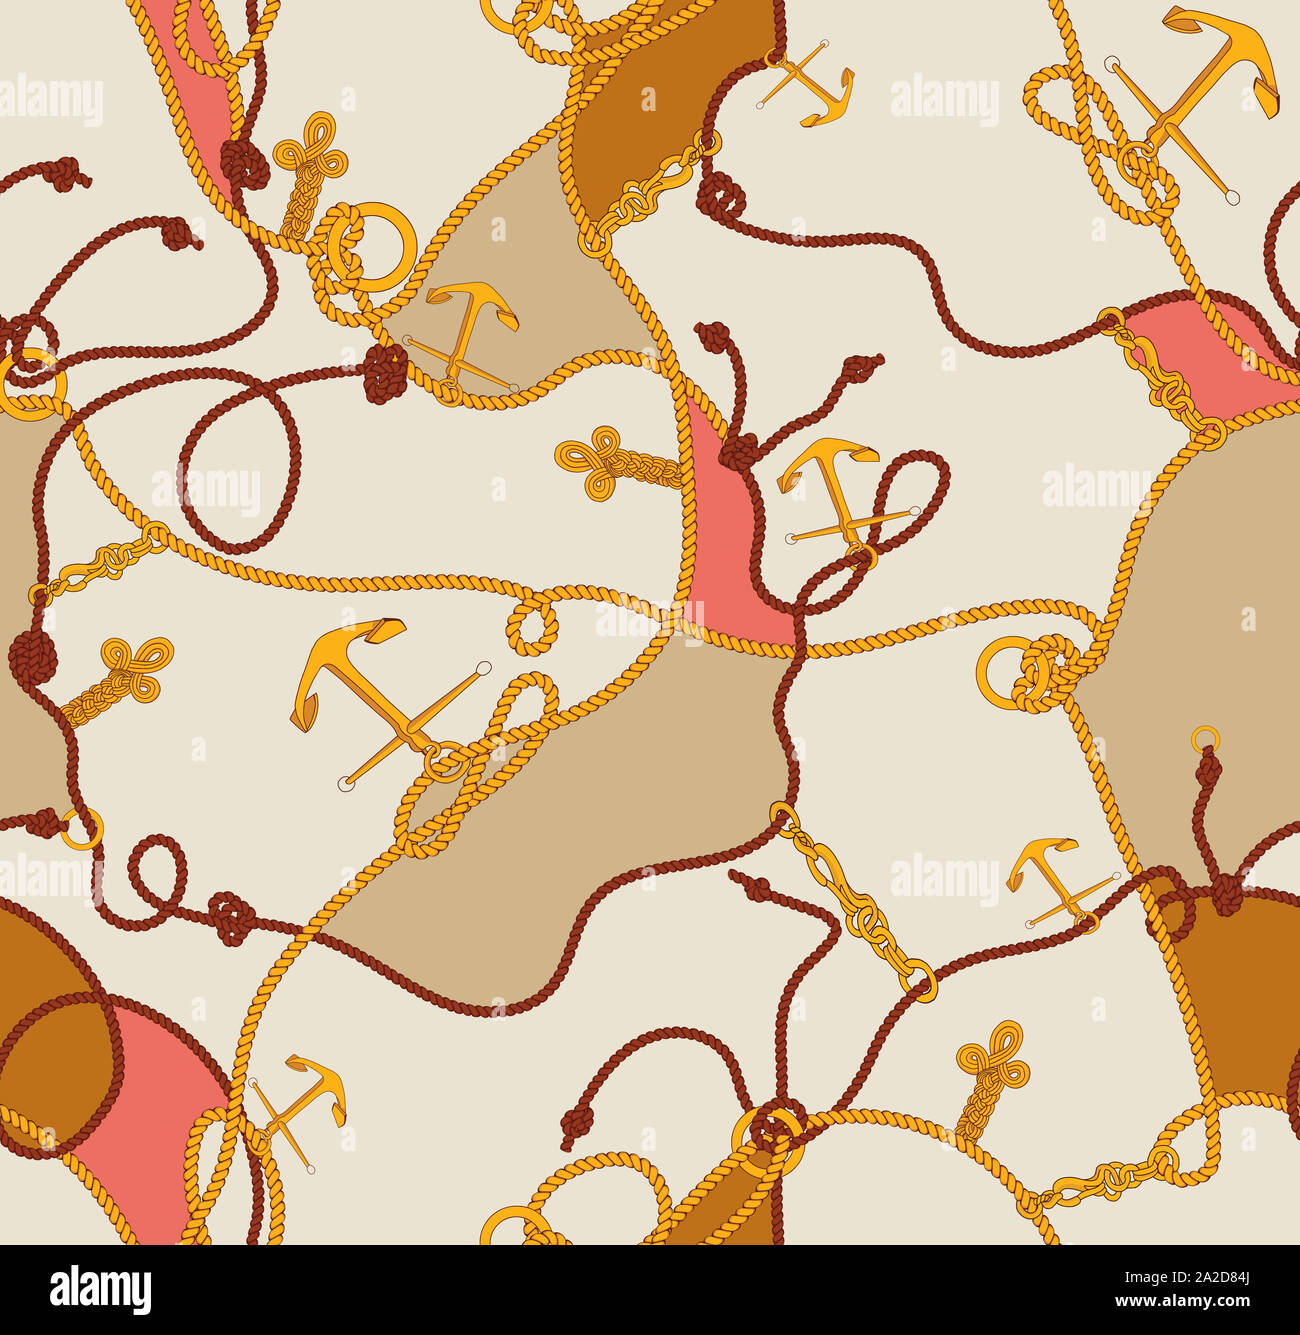 Seamless marine motifs pattern with golden sea anchors, colored ropes on light background patch for textile and fabric design. Stock Photo